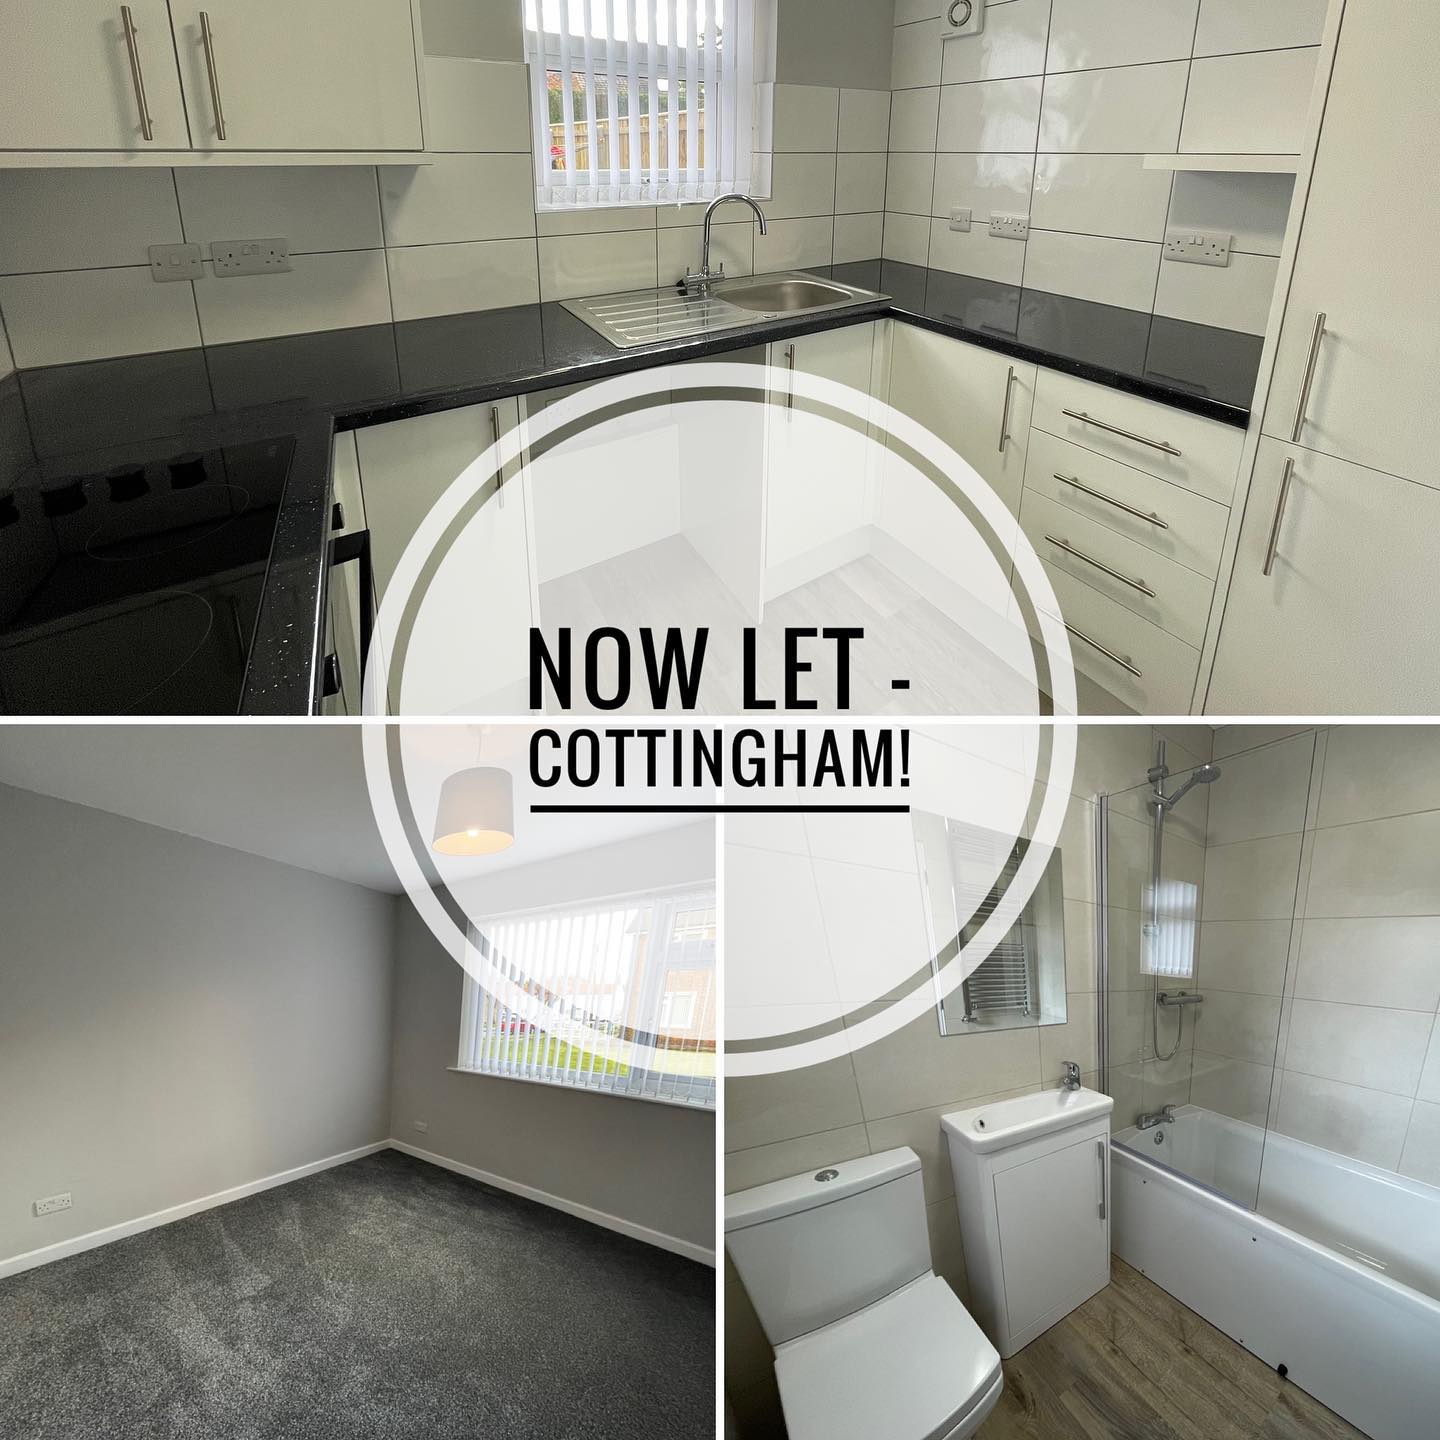 New tenant found for this immaculate one bedroom ground floor flat in Cottingham! If you’re a landlord looking to let in the area, why not see how we can help? #lettingagent #hull #hu16 #flattorent #managingagenthull